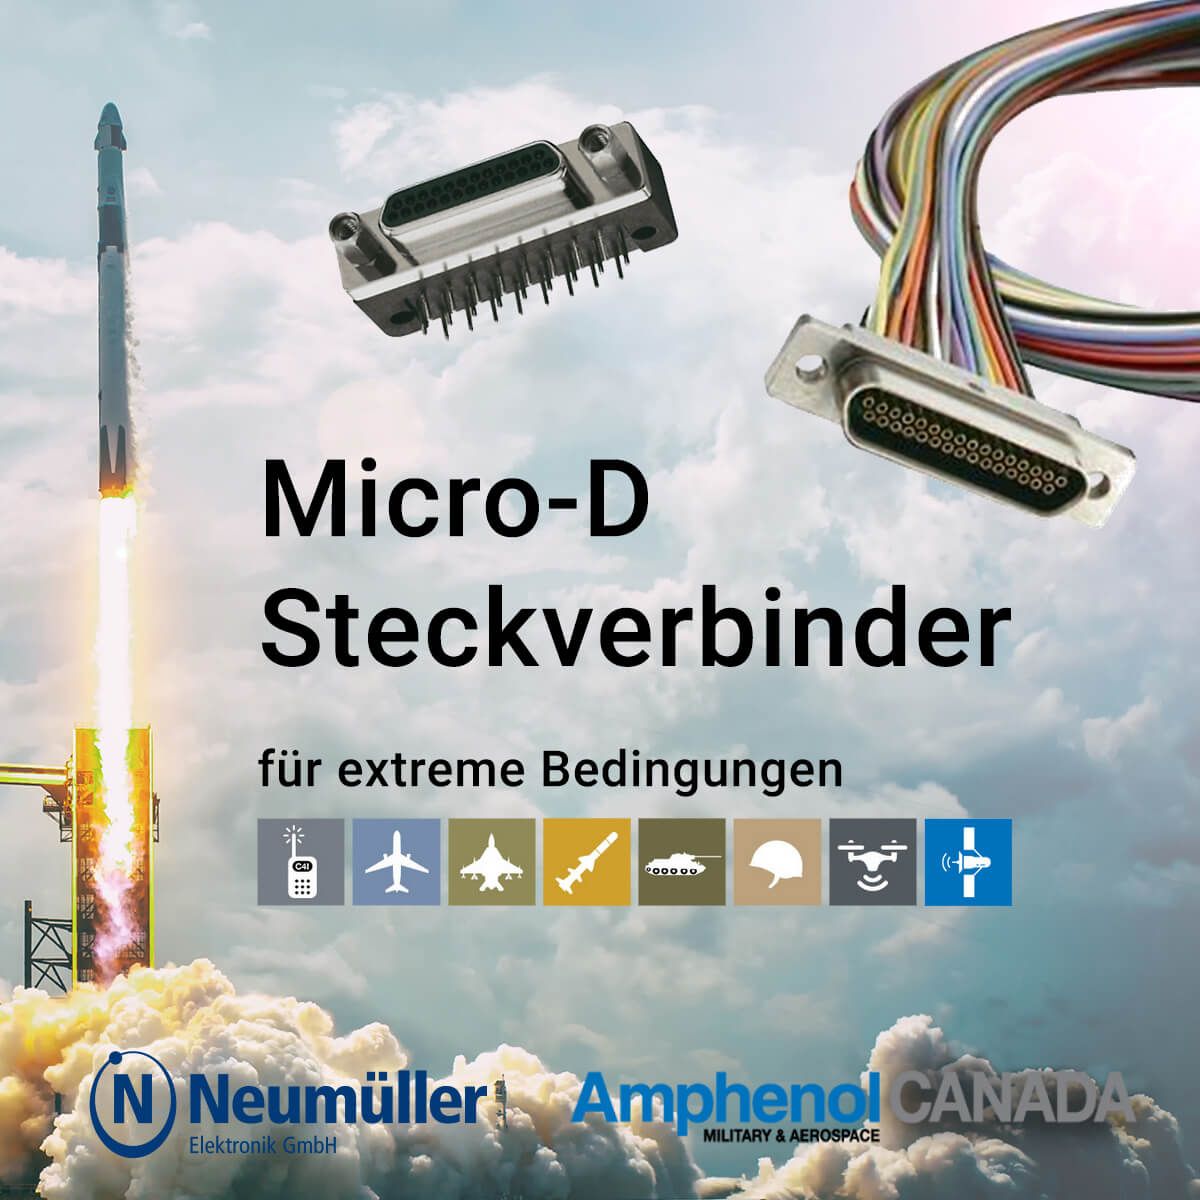 New Micro-D connectors (M83513) from Amphenol Canada